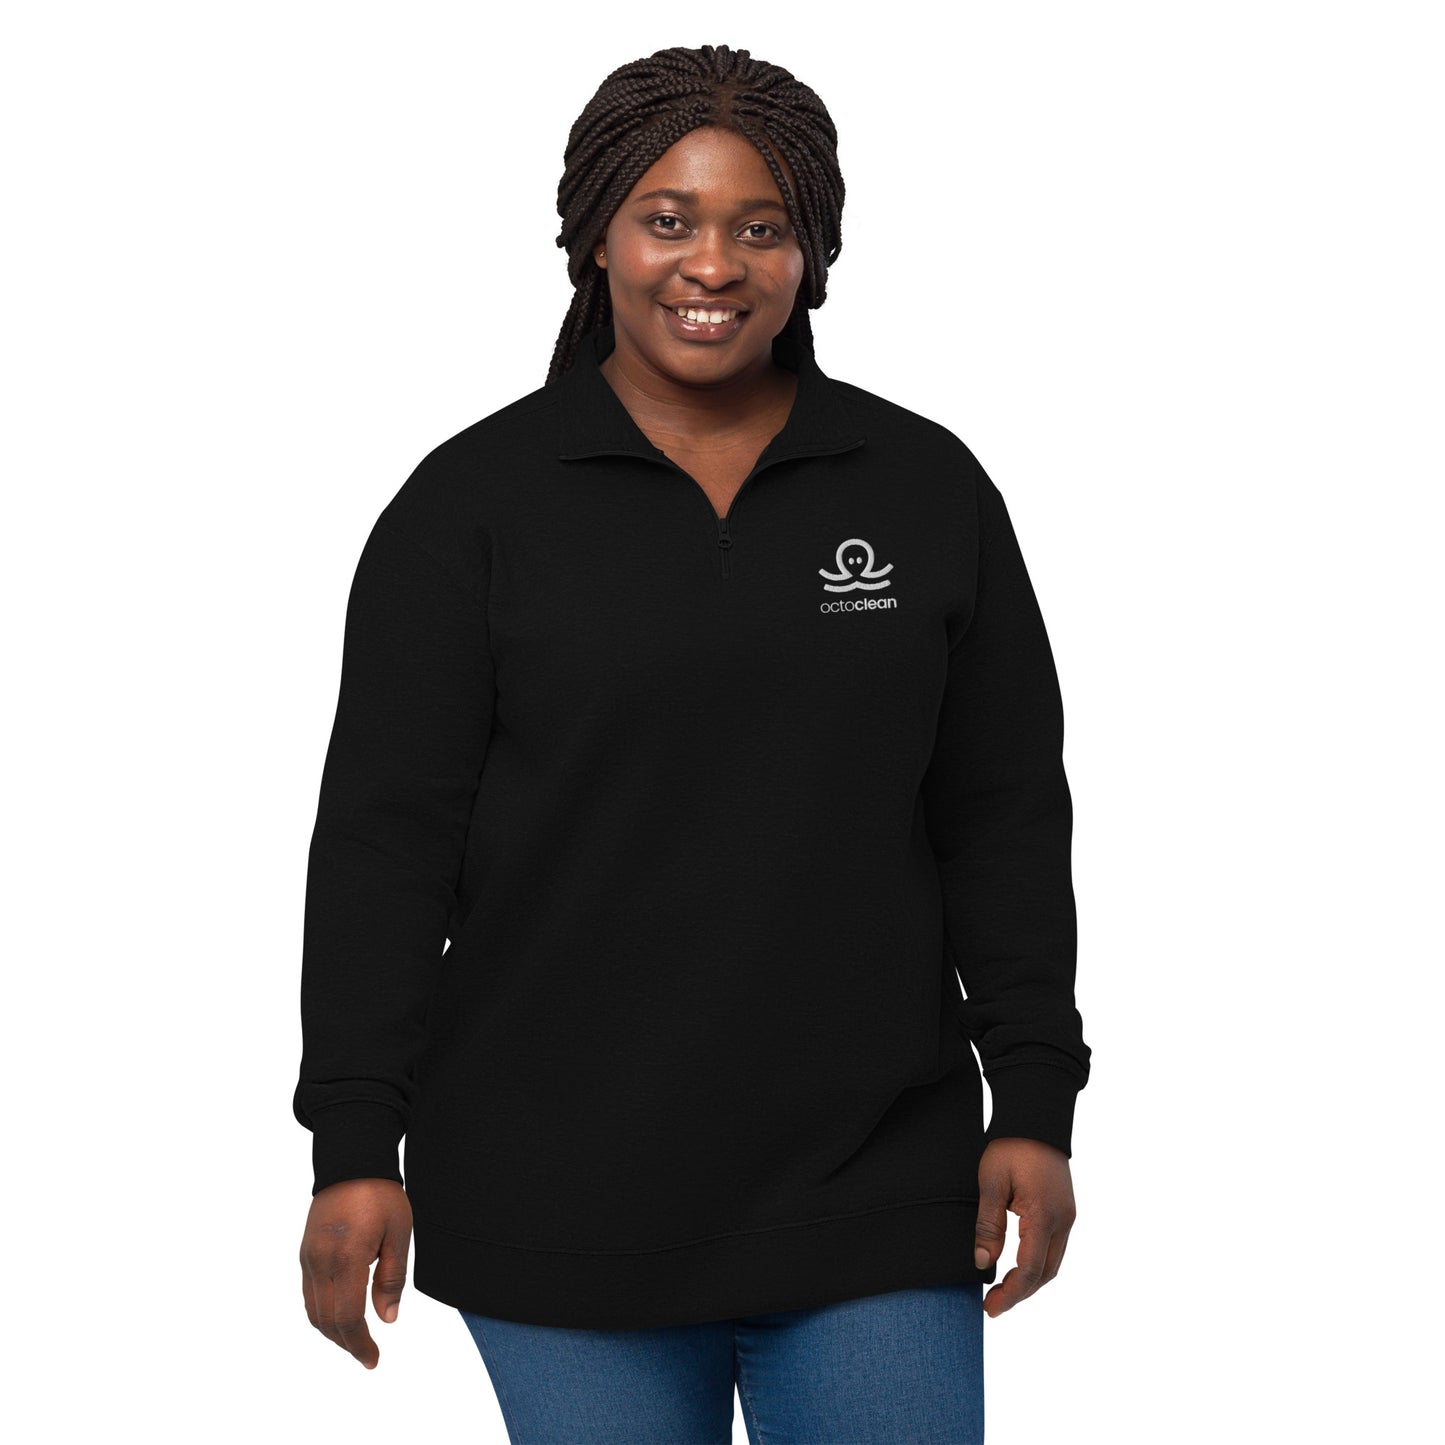 Unisex Embroidered fleece Pullover